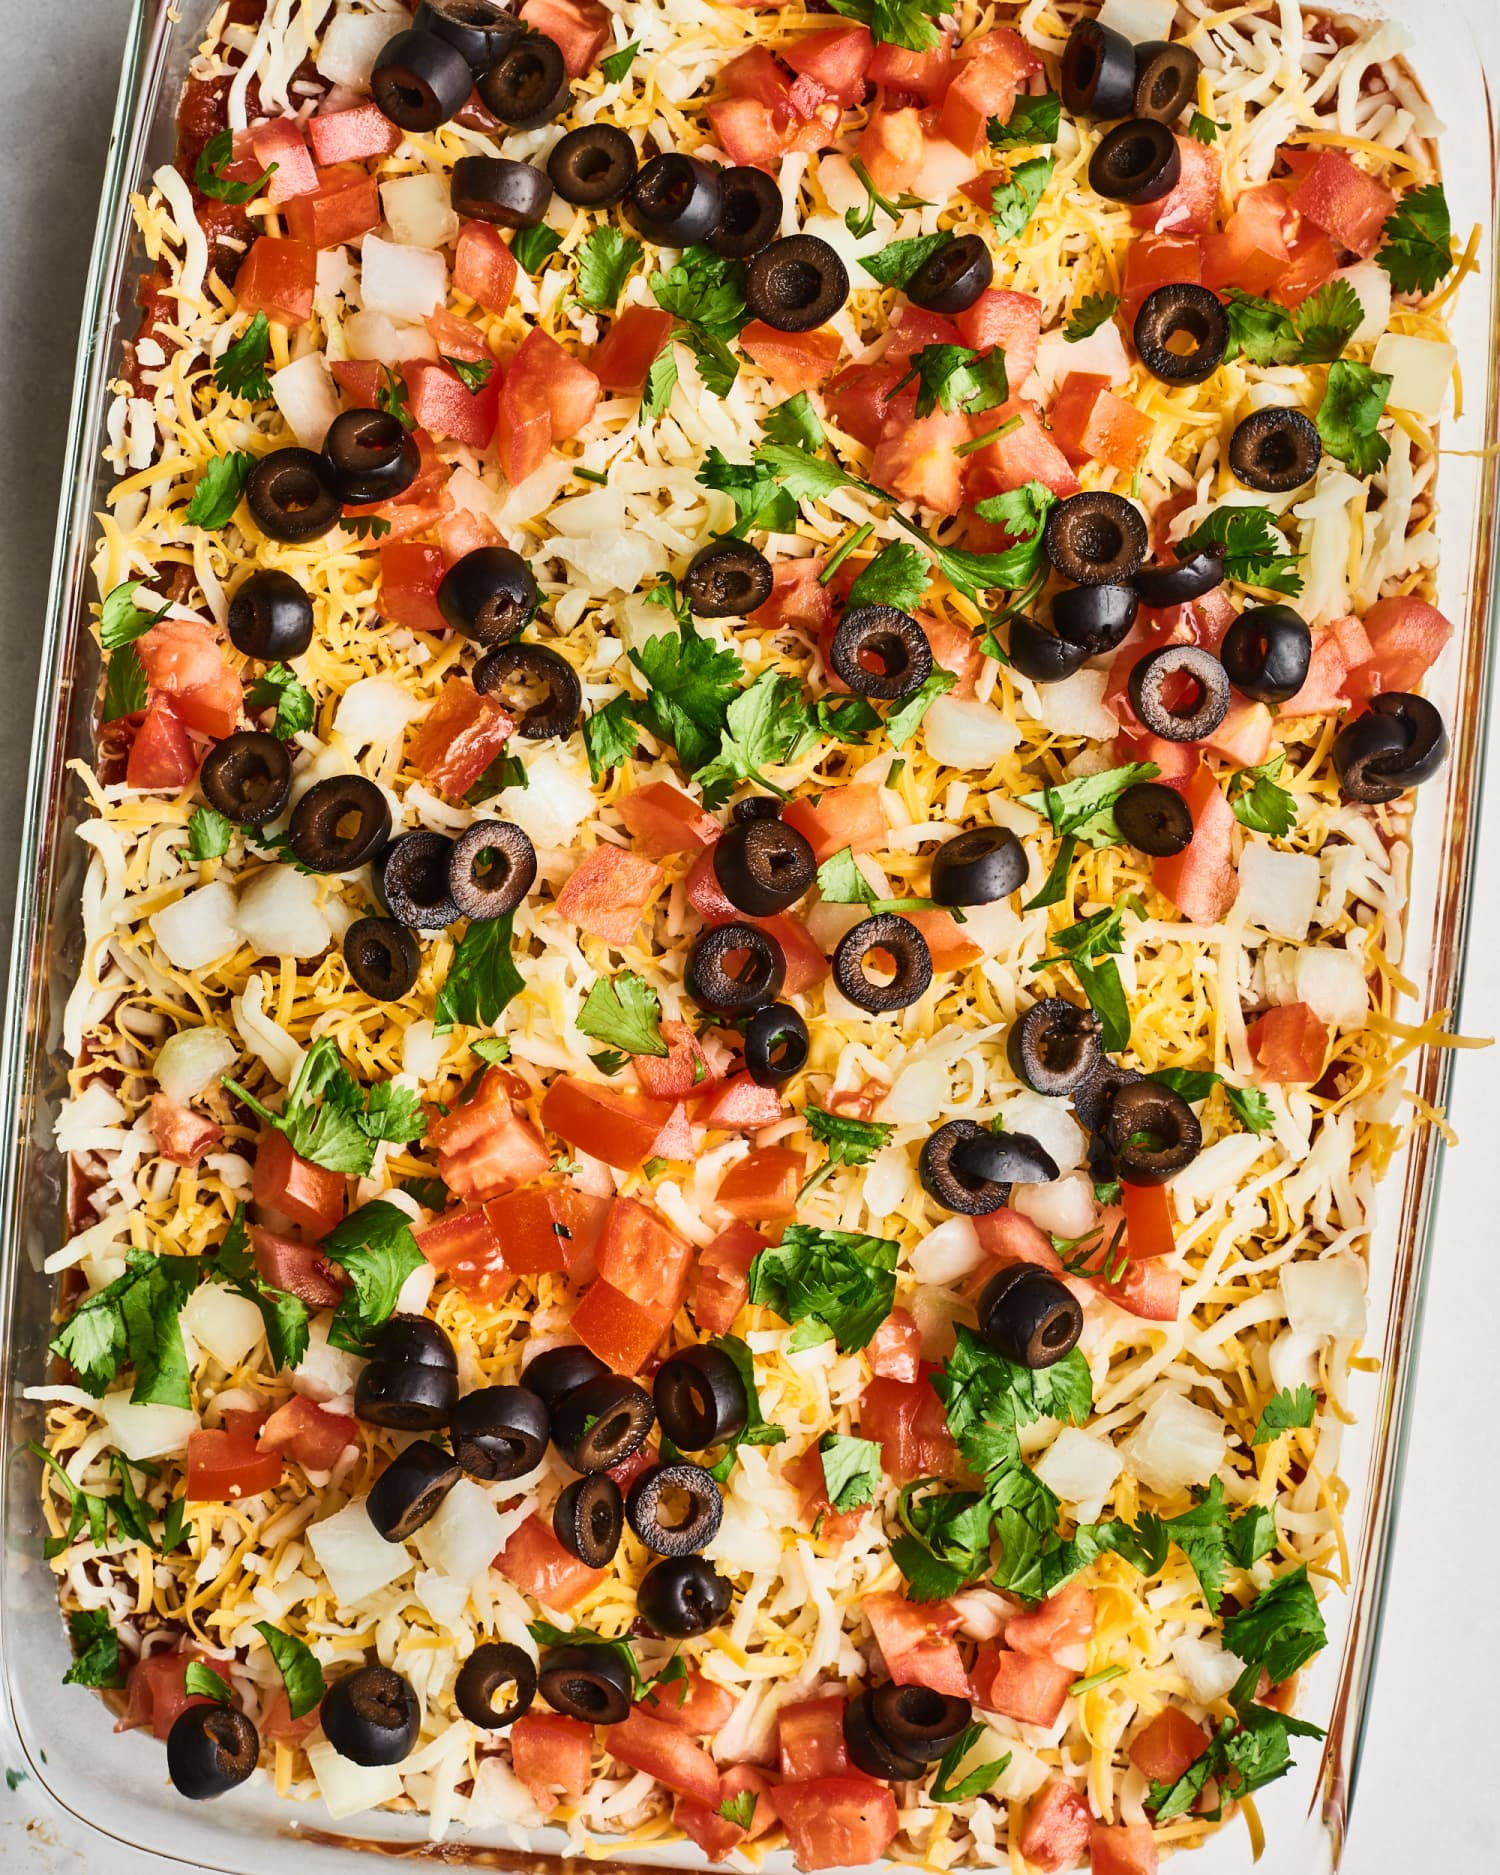 Graduation Party Food Ideas On A Budget
 The Best Graduation Party Food Ideas